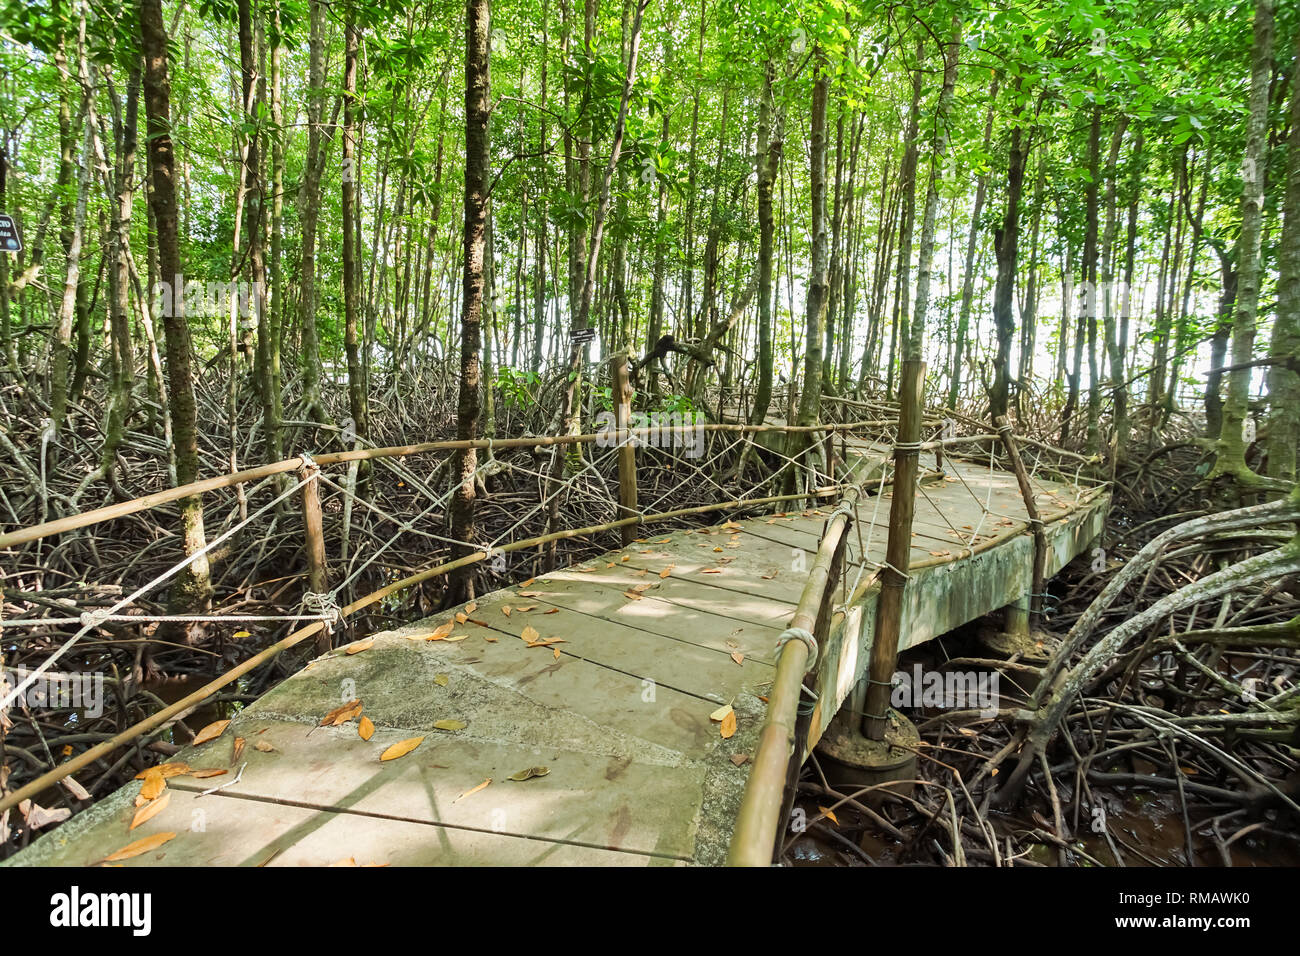 Environment conservation Mangrove forest in Trad province, Thailand. Stock Photo